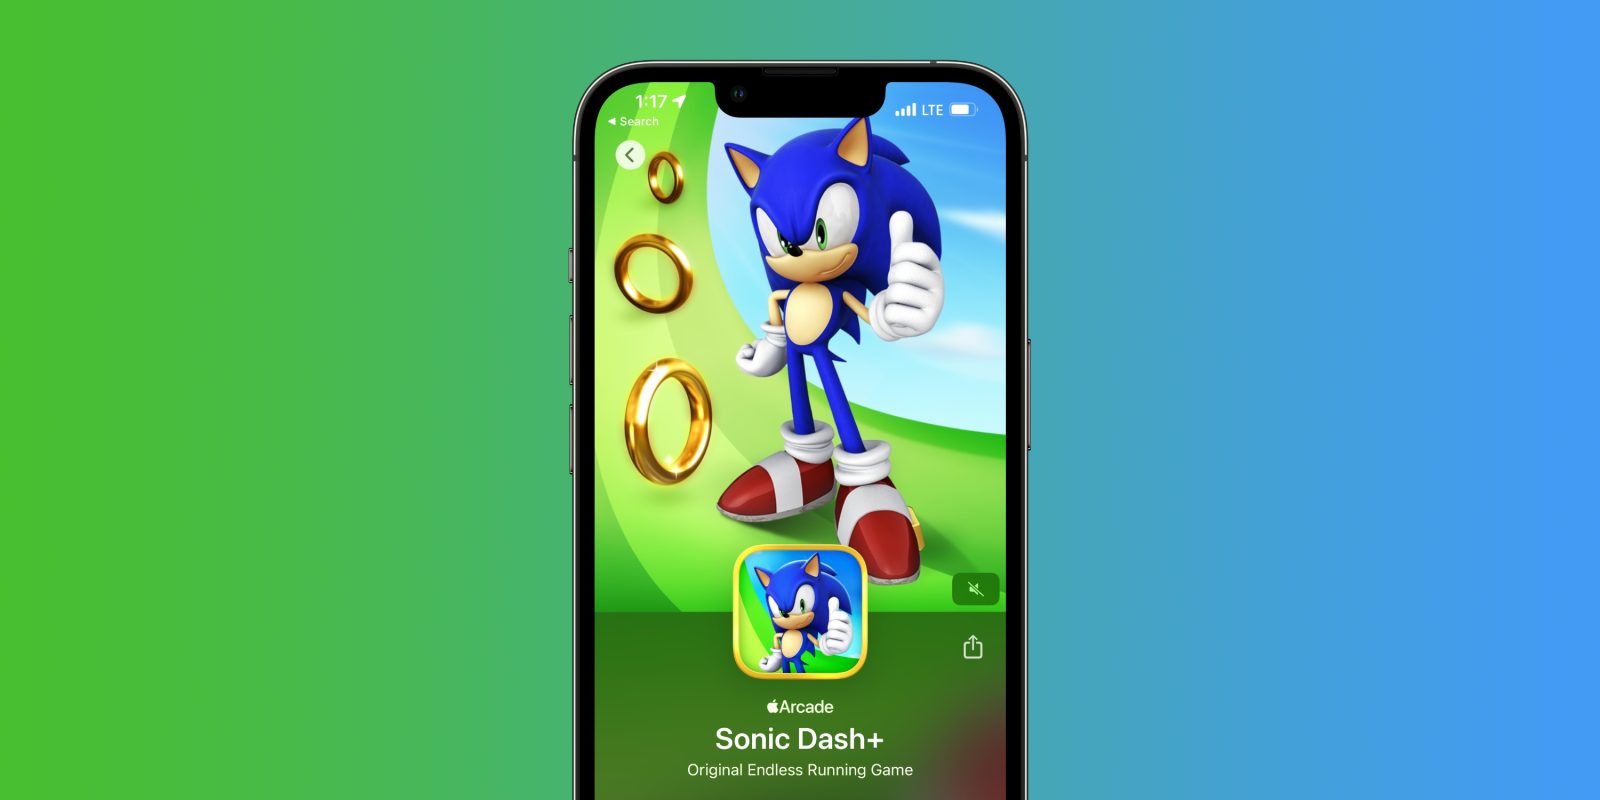 Sonic Dash+ coming to Apple Arcade so you can collect the coins